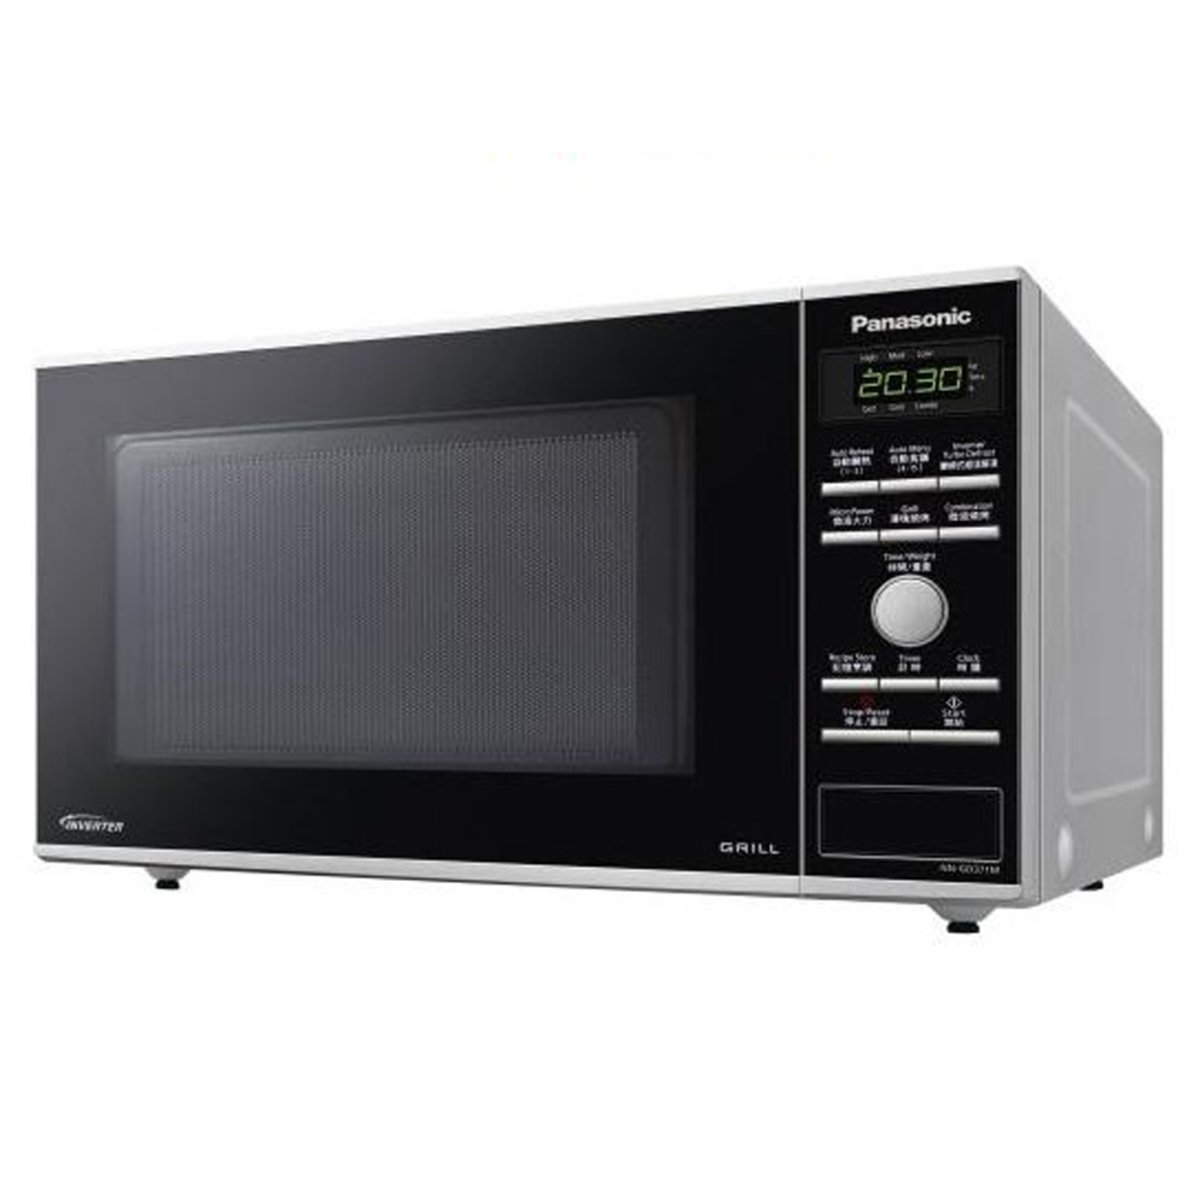 Panasonic Microwave Oven with Grill NNGD371MK 23 Ltr